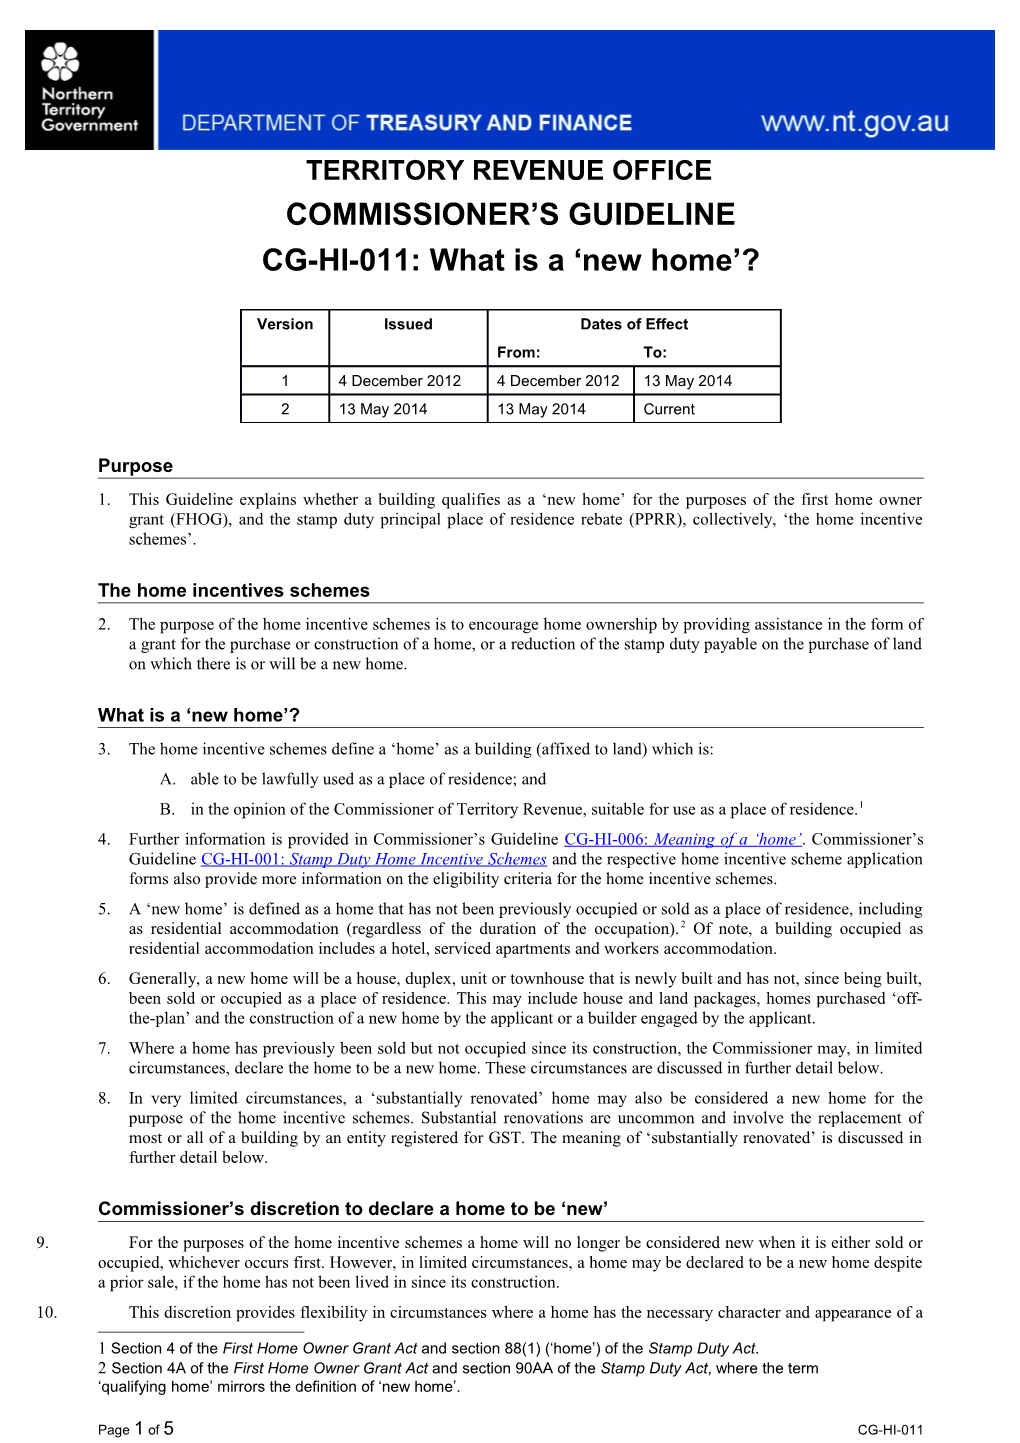 Commissioners Guideline - What Is a New Home - CG-HI-011